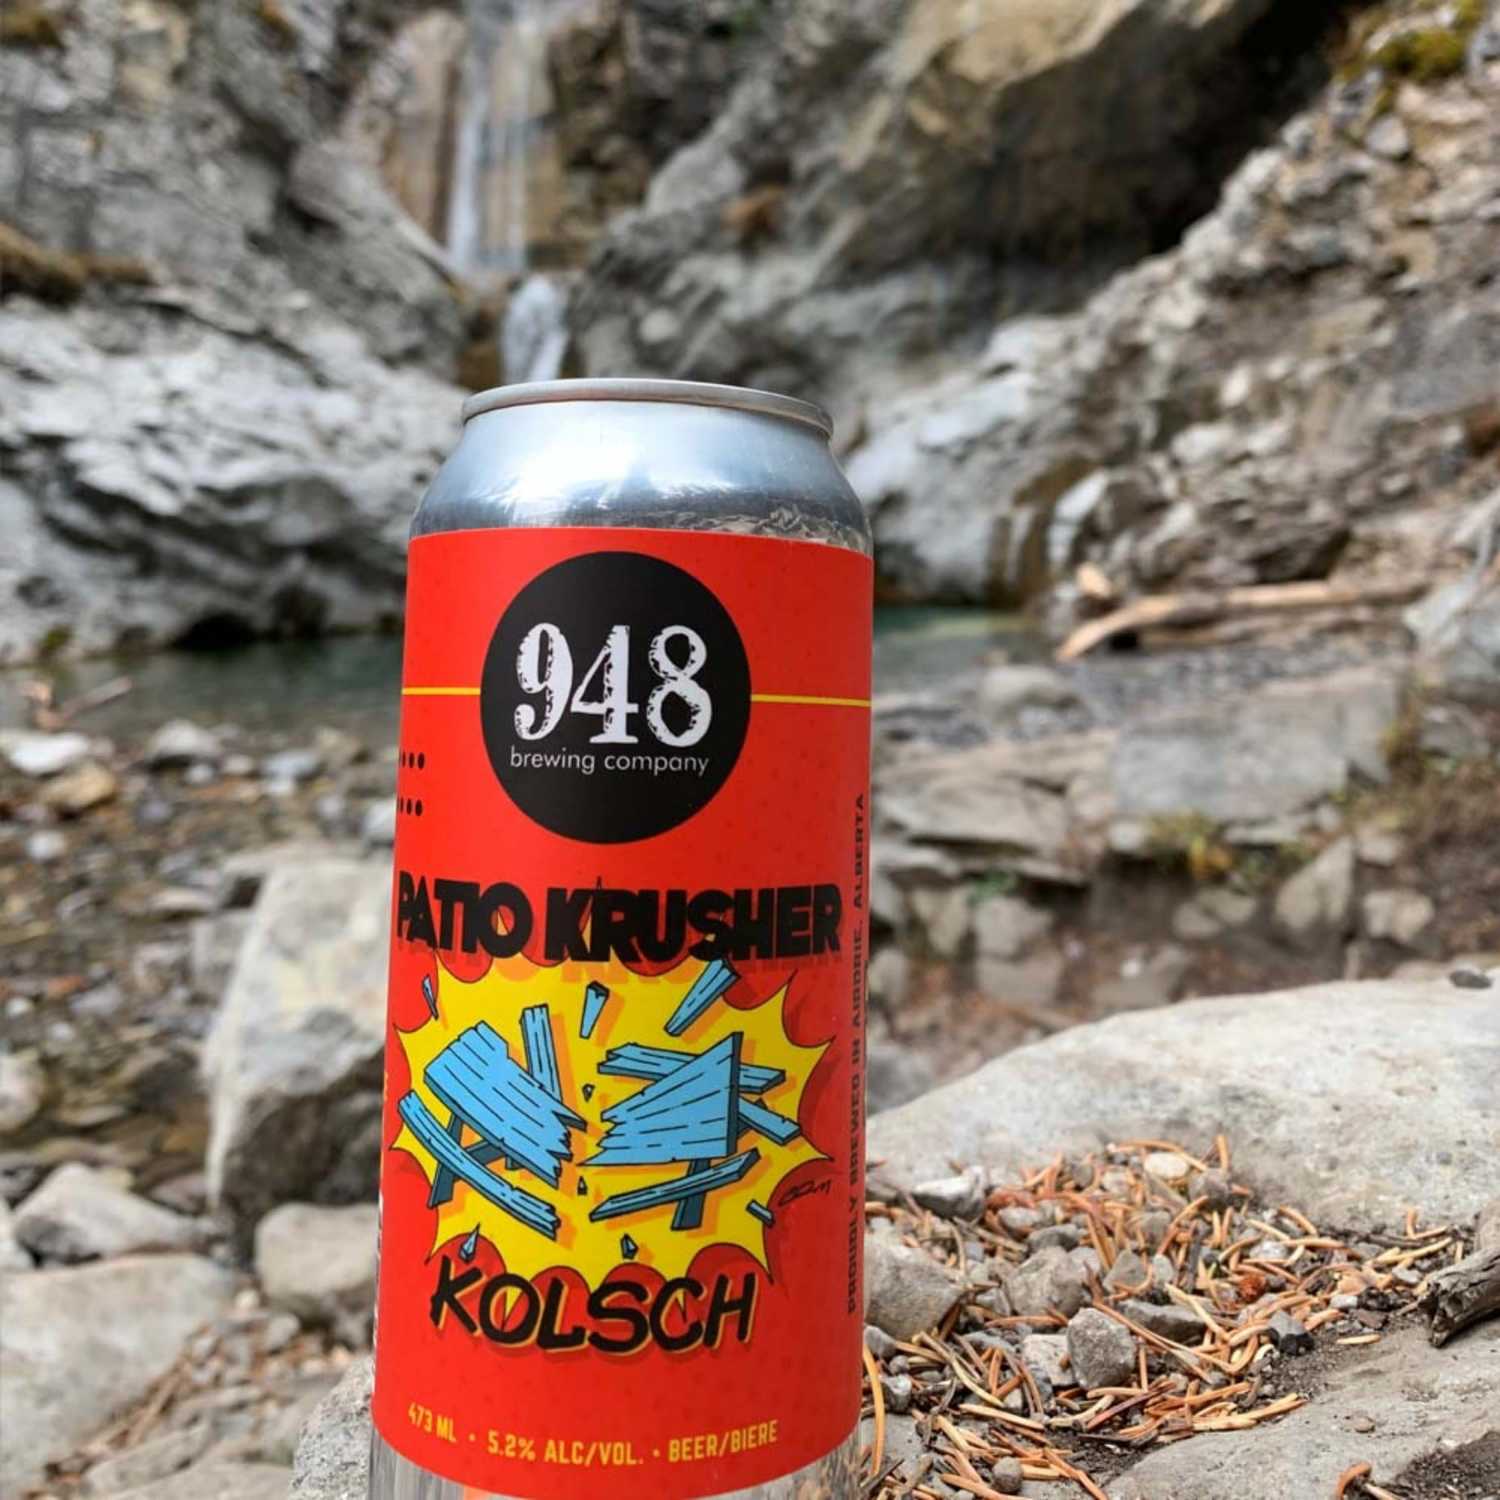 948 Patio Krusher beer can